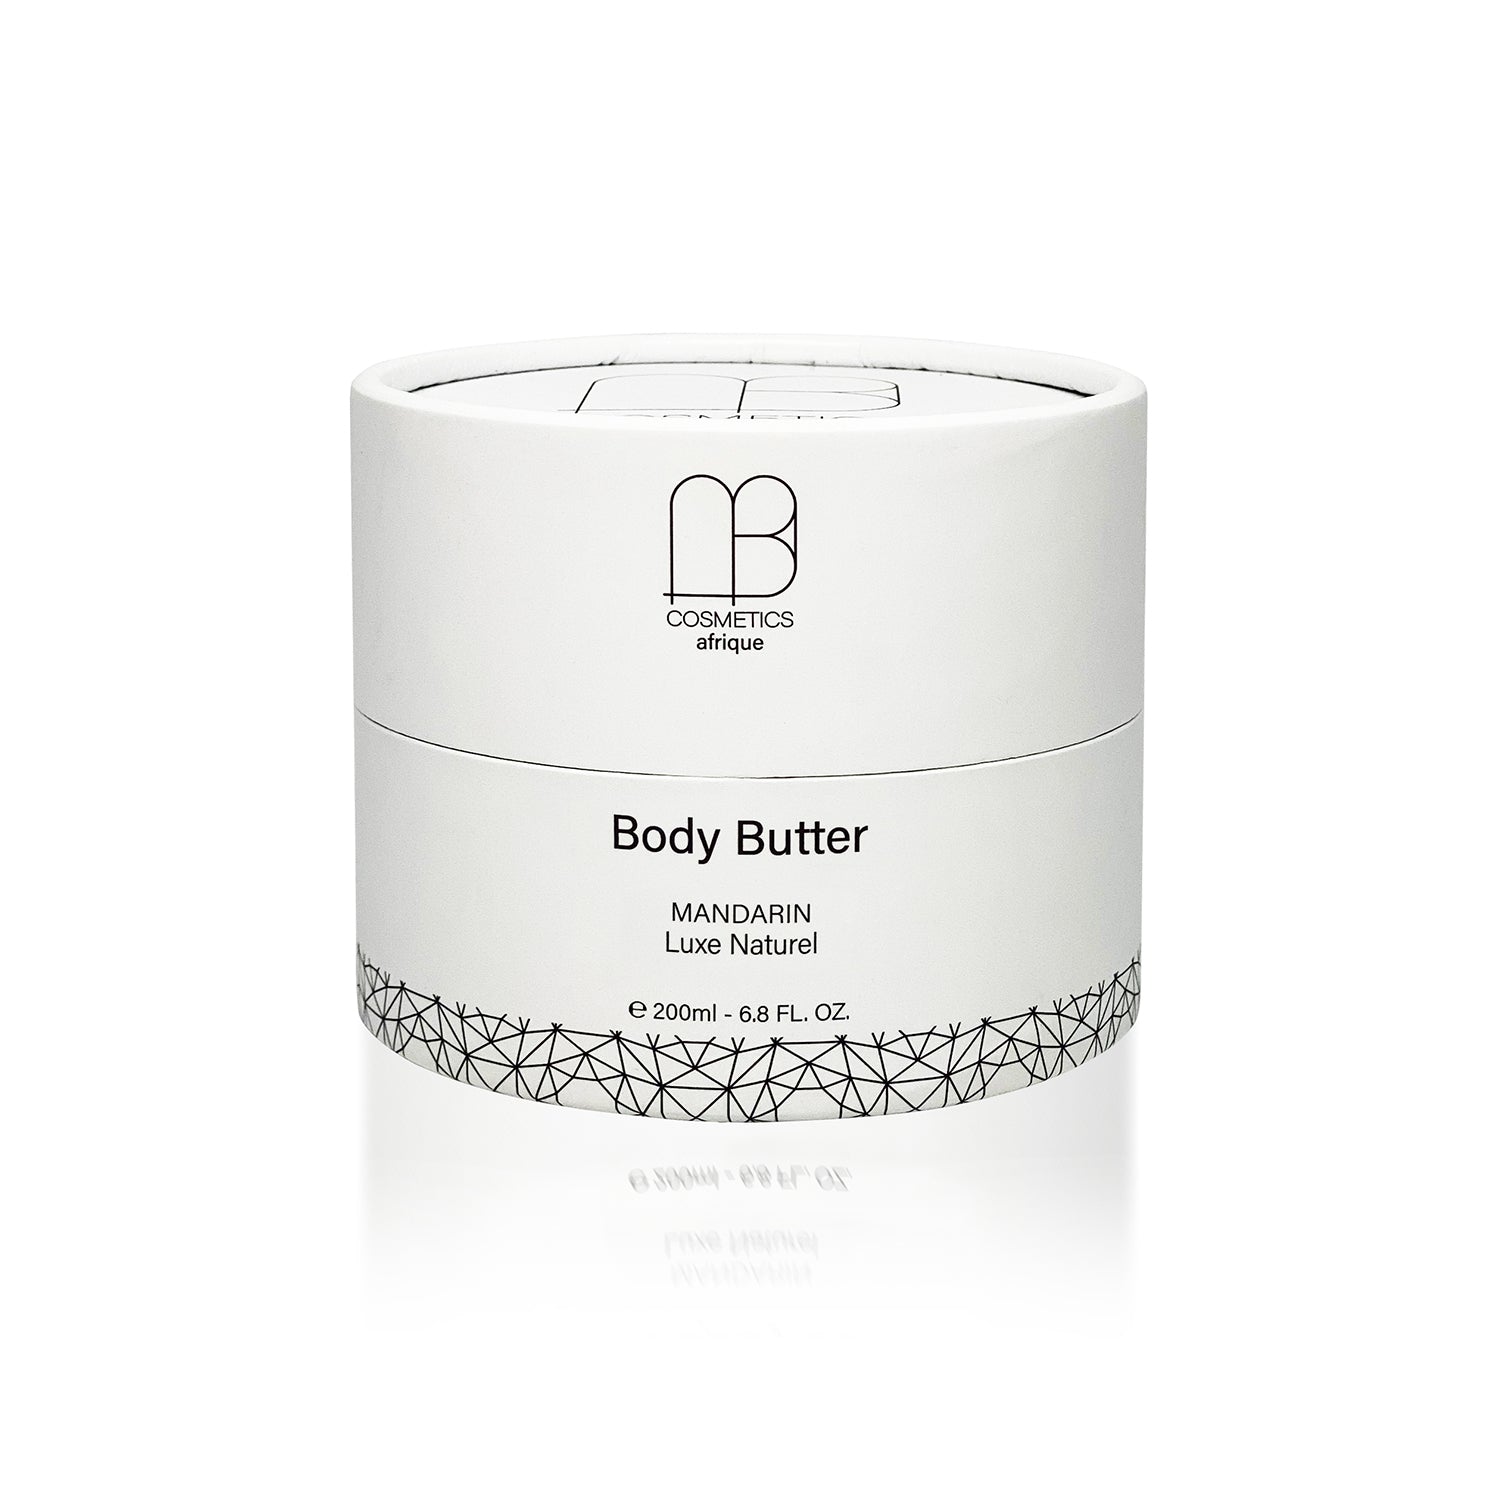 Body Butter Mandarin - Luxe Naturel - Soothing and Restoring